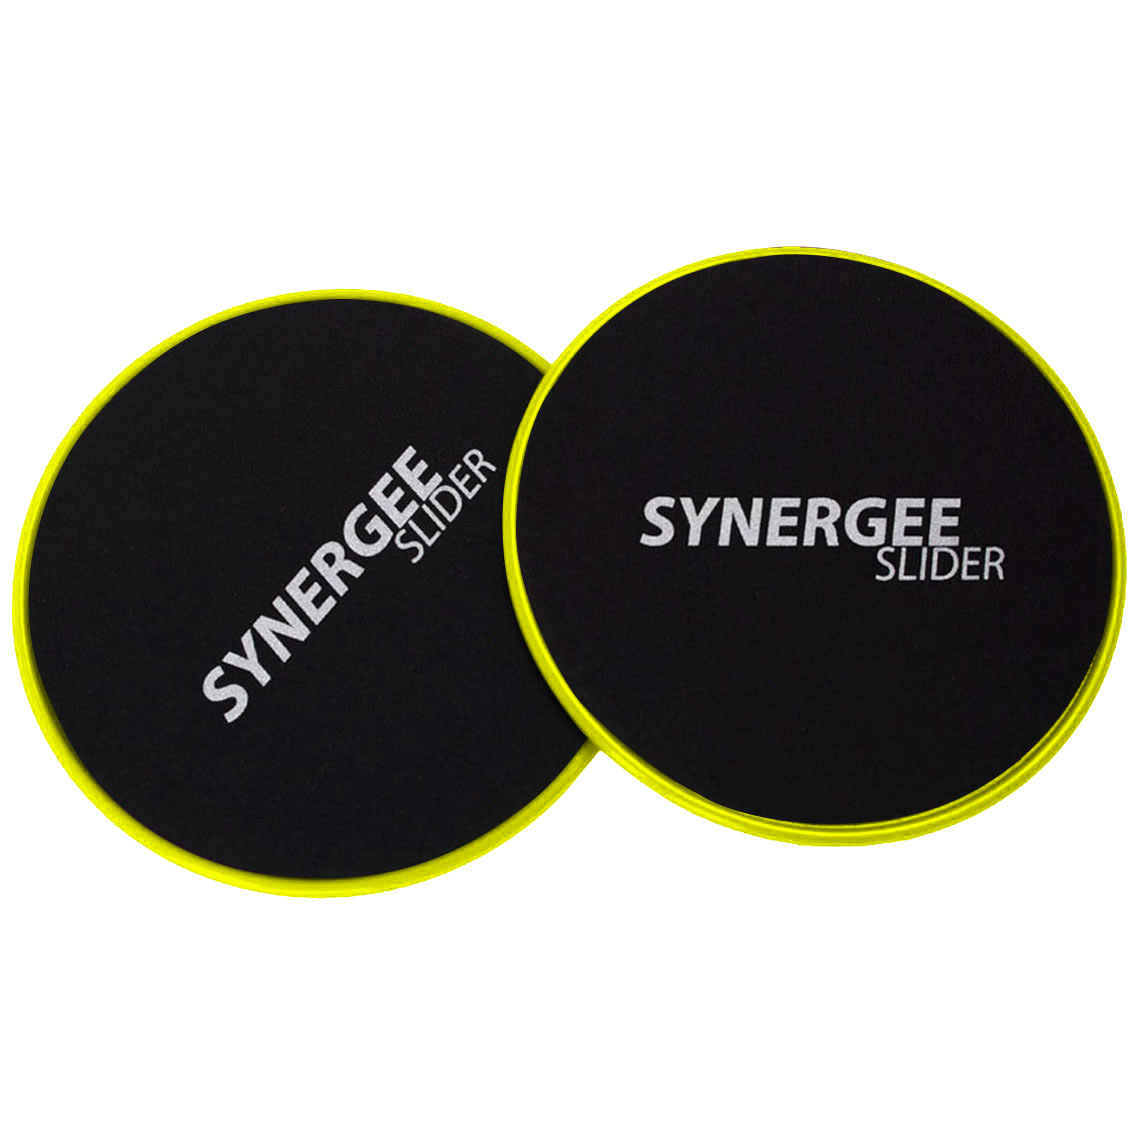 https://synergee.ca/wp-content/uploads/2017/01/yellow-Disc.jpg